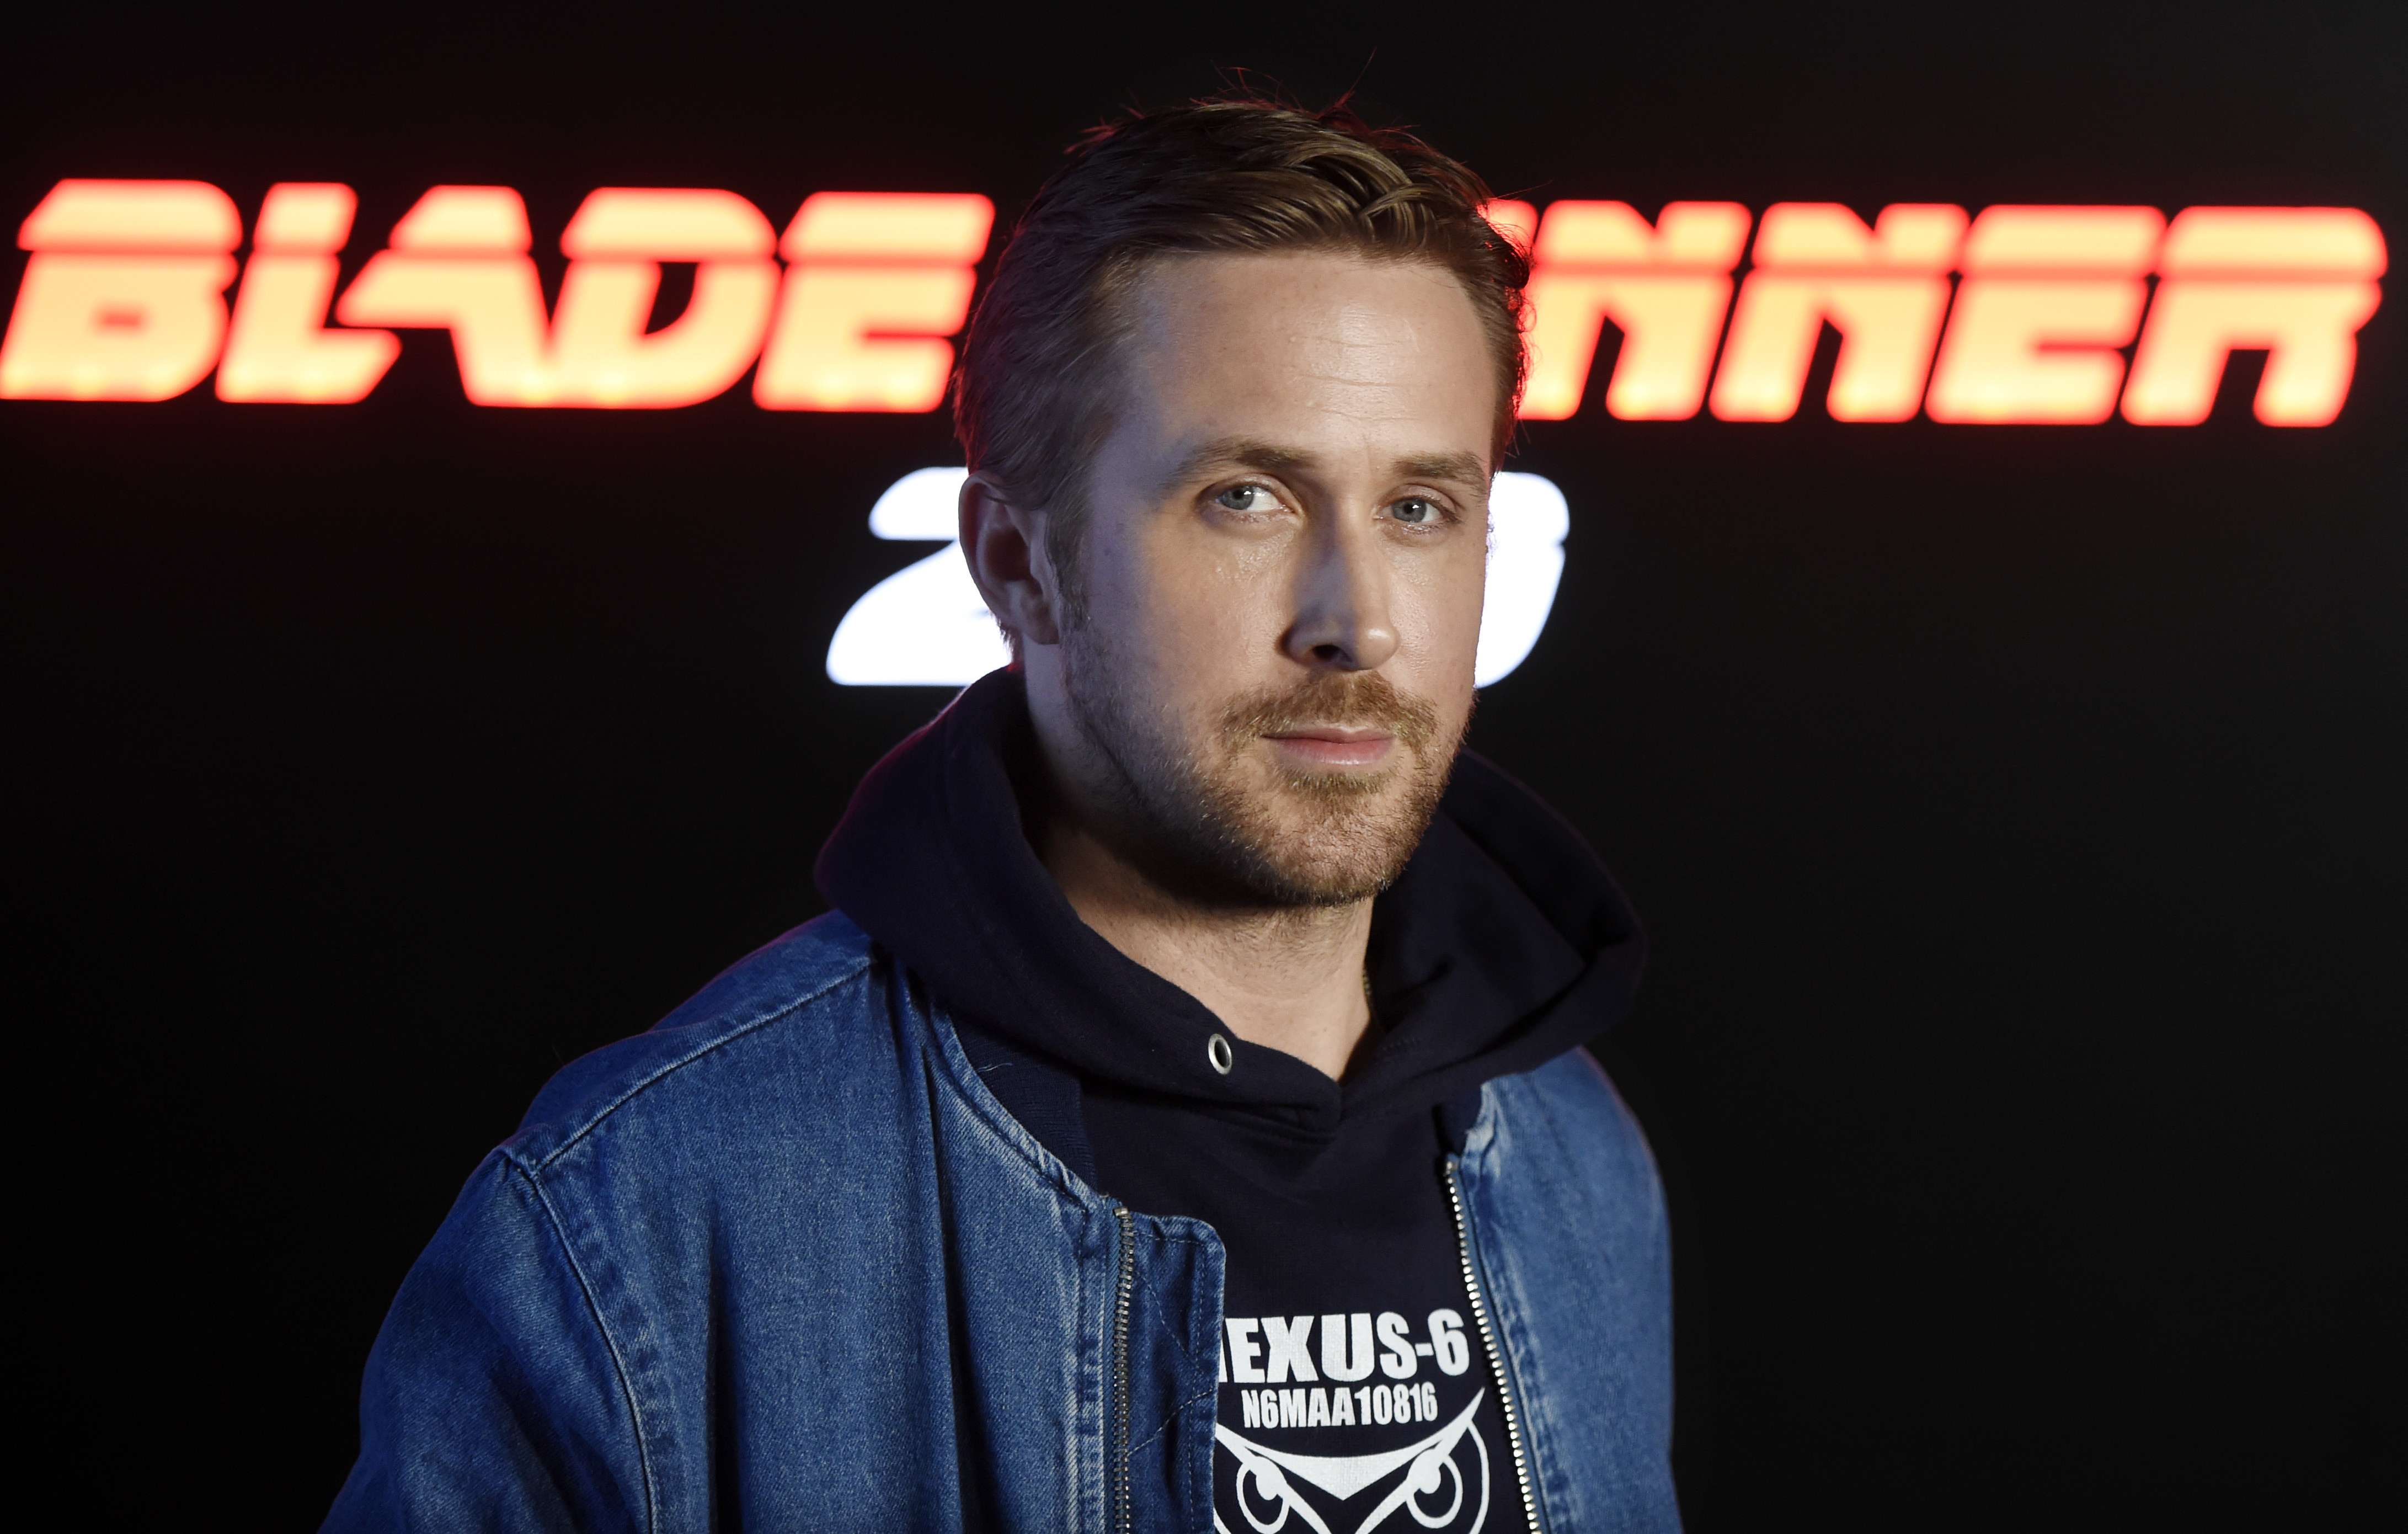 Sony offers more glimpses of follow-up to Ridley Scott’s 1982 classic, including scene where Gosling meets the now-retired Rick Deckard, played by Harrison Ford, and footage of Jared Leto as a villain and Robin Wright as a cop